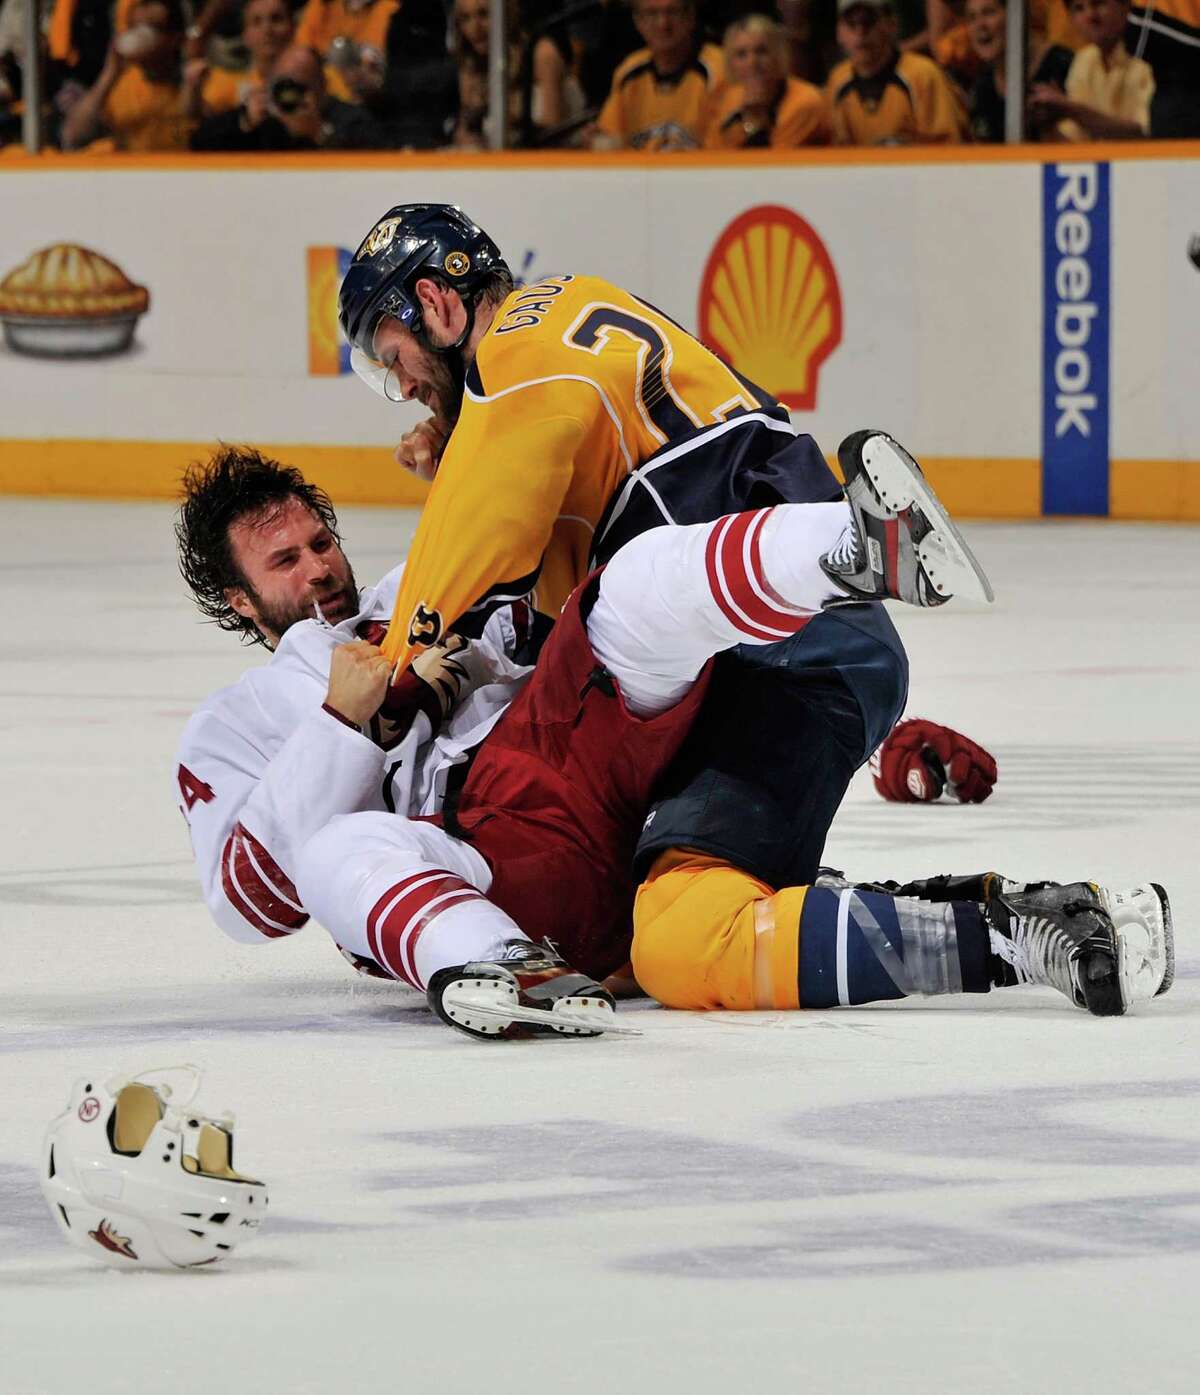 The Predators' Paul Gaustad gets the upper hand on the Coyotes' Kyle Chipchura during the first period.